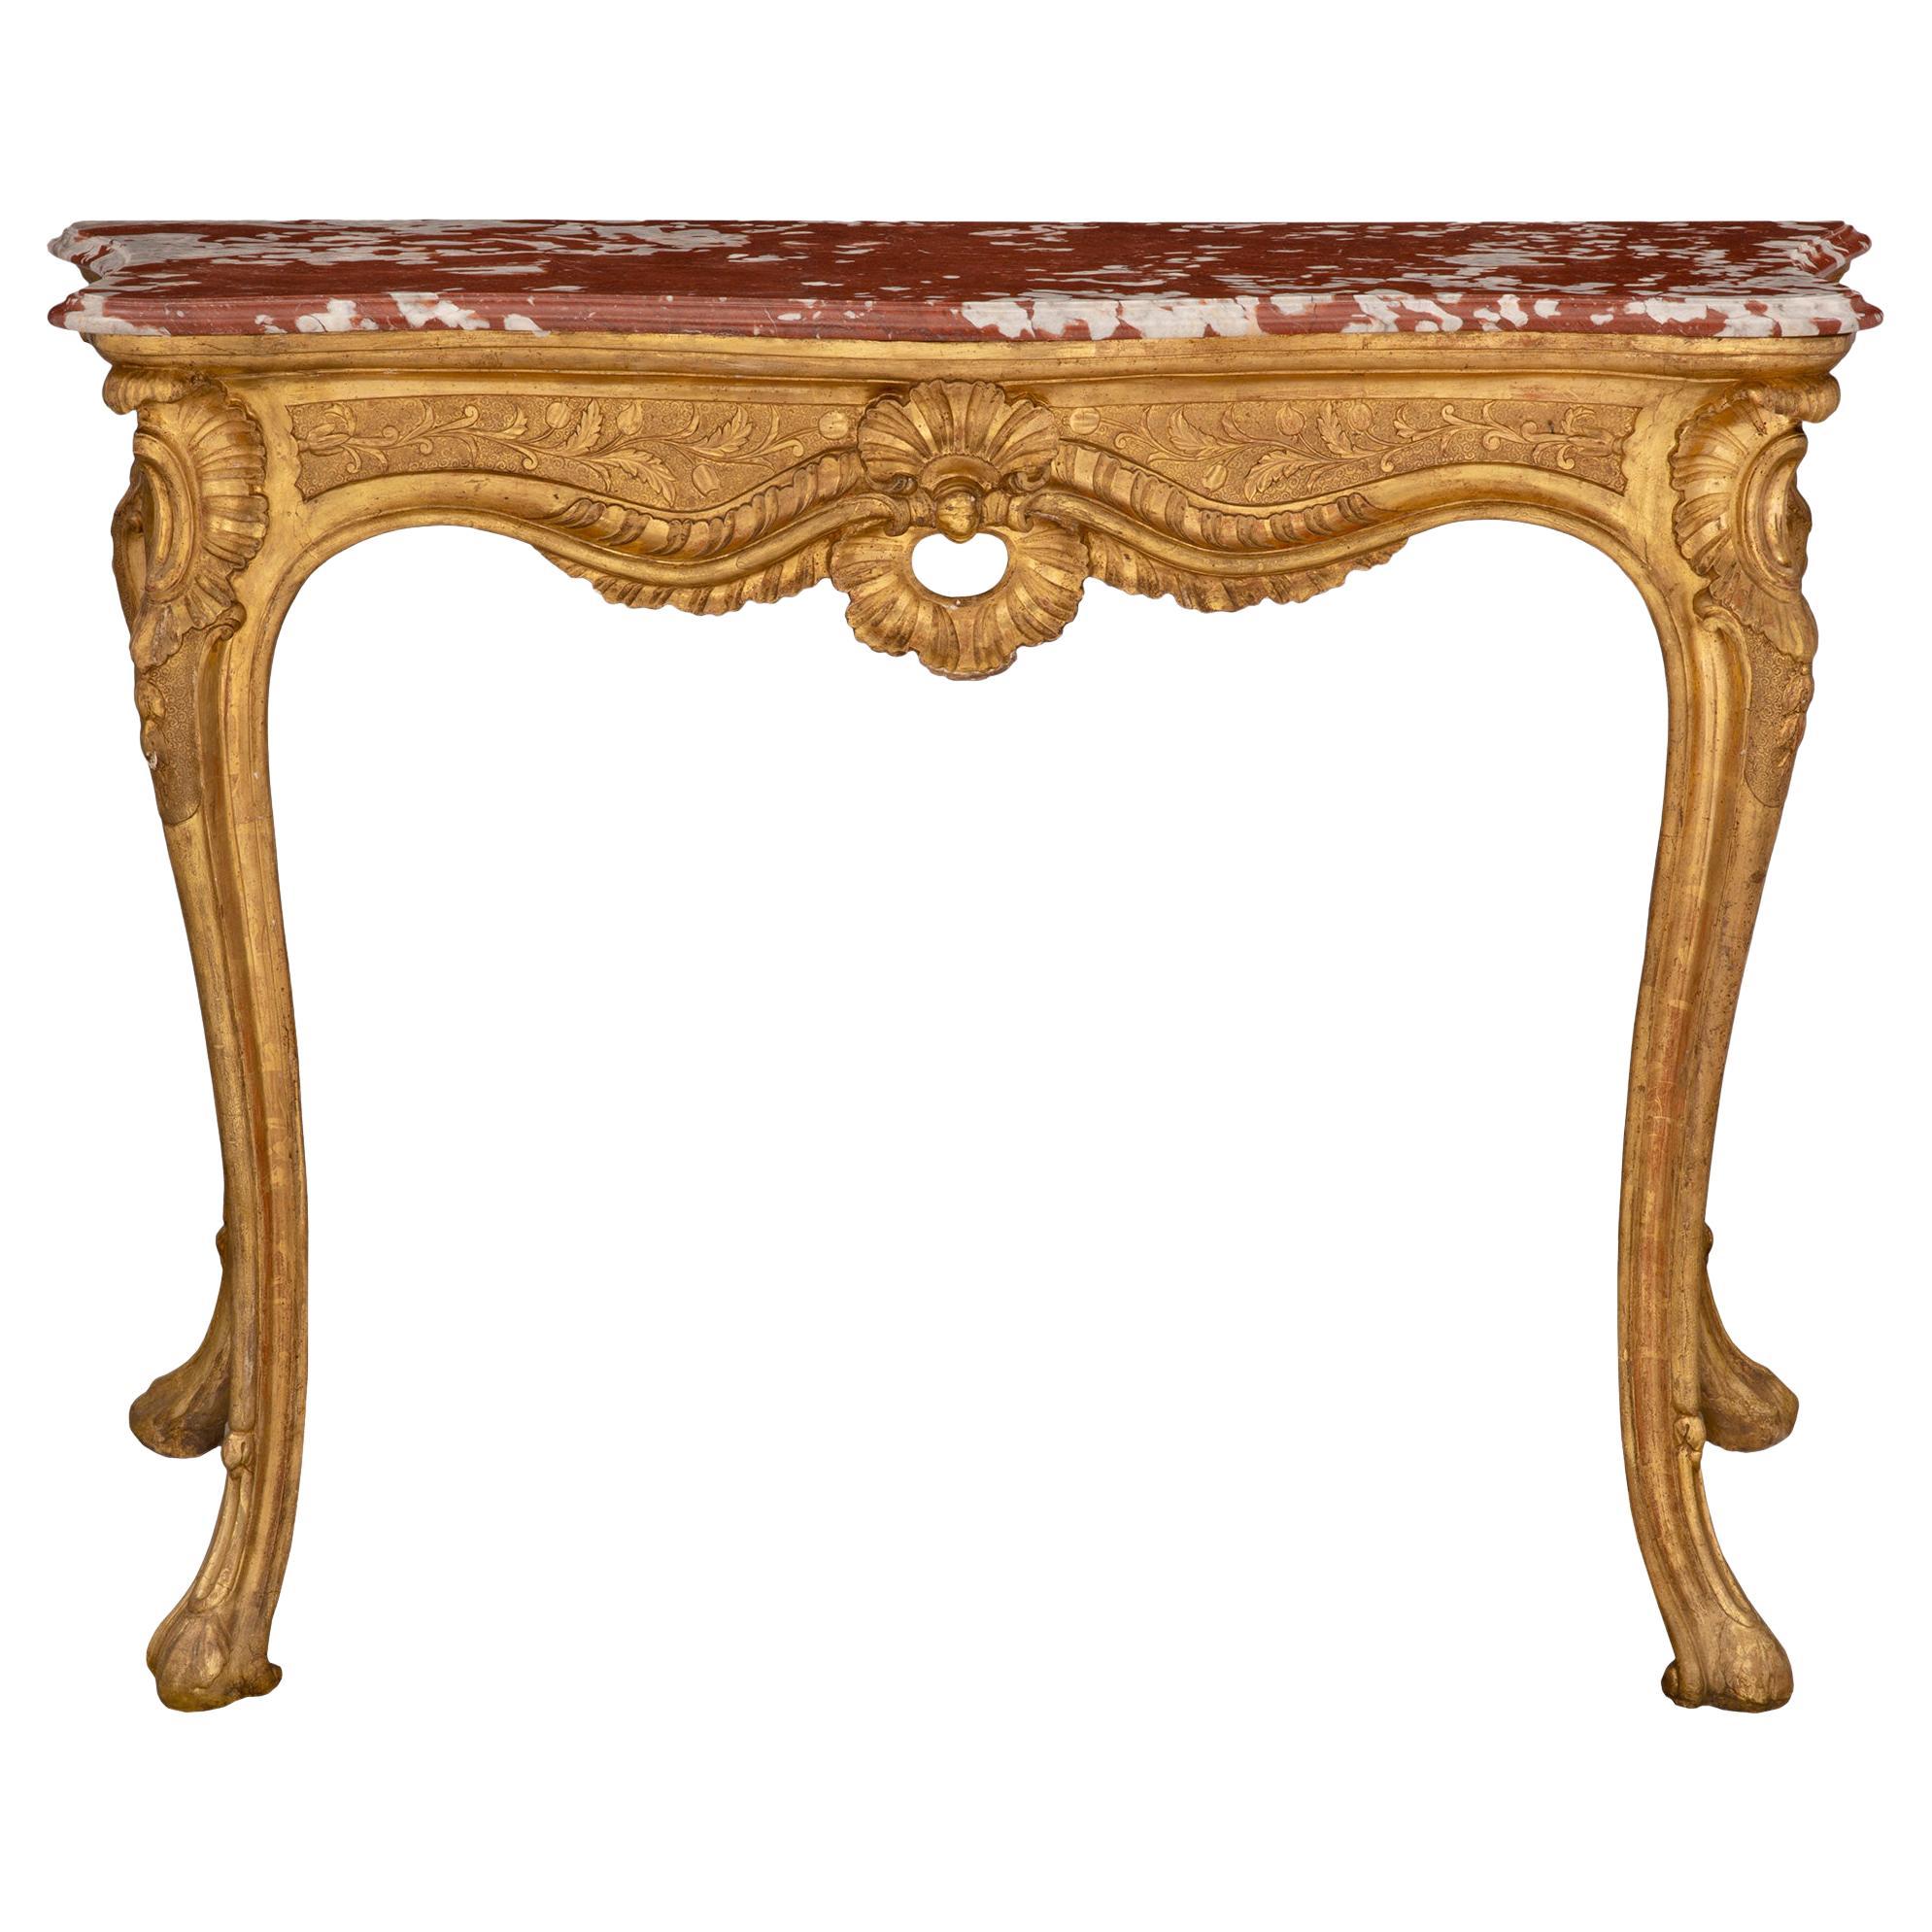 Italian 18th Century Louis XV Period Giltwood and Marble Freestanding Console